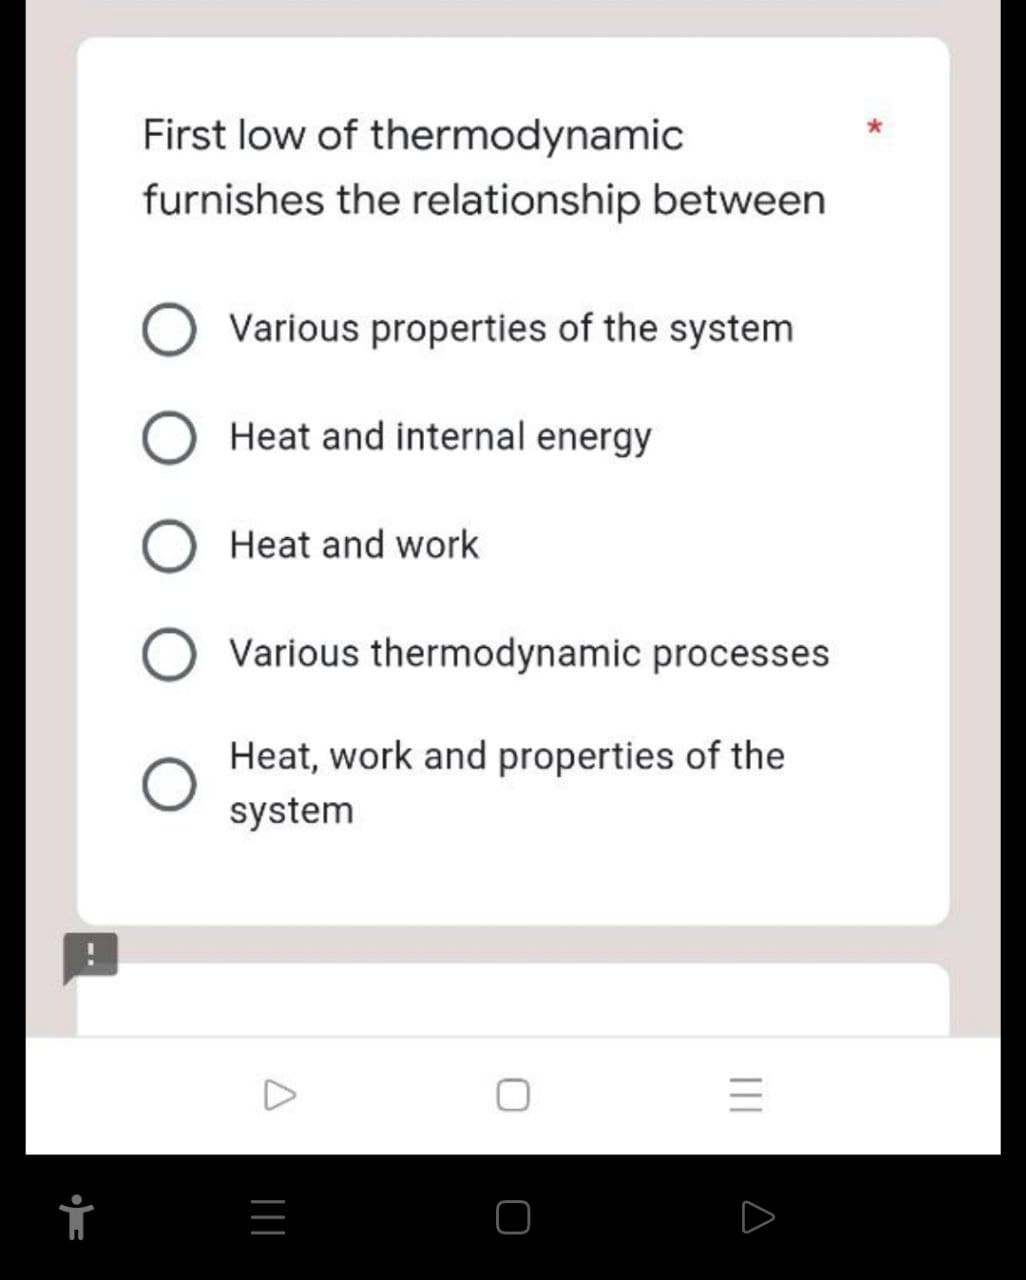 First low of thermodynamic
furnishes the relationship between
O Various properties of the system
O Heat and internal energy
Heat and work
Various thermodynamic processes
Heat, work and properties of the
system
=
|||